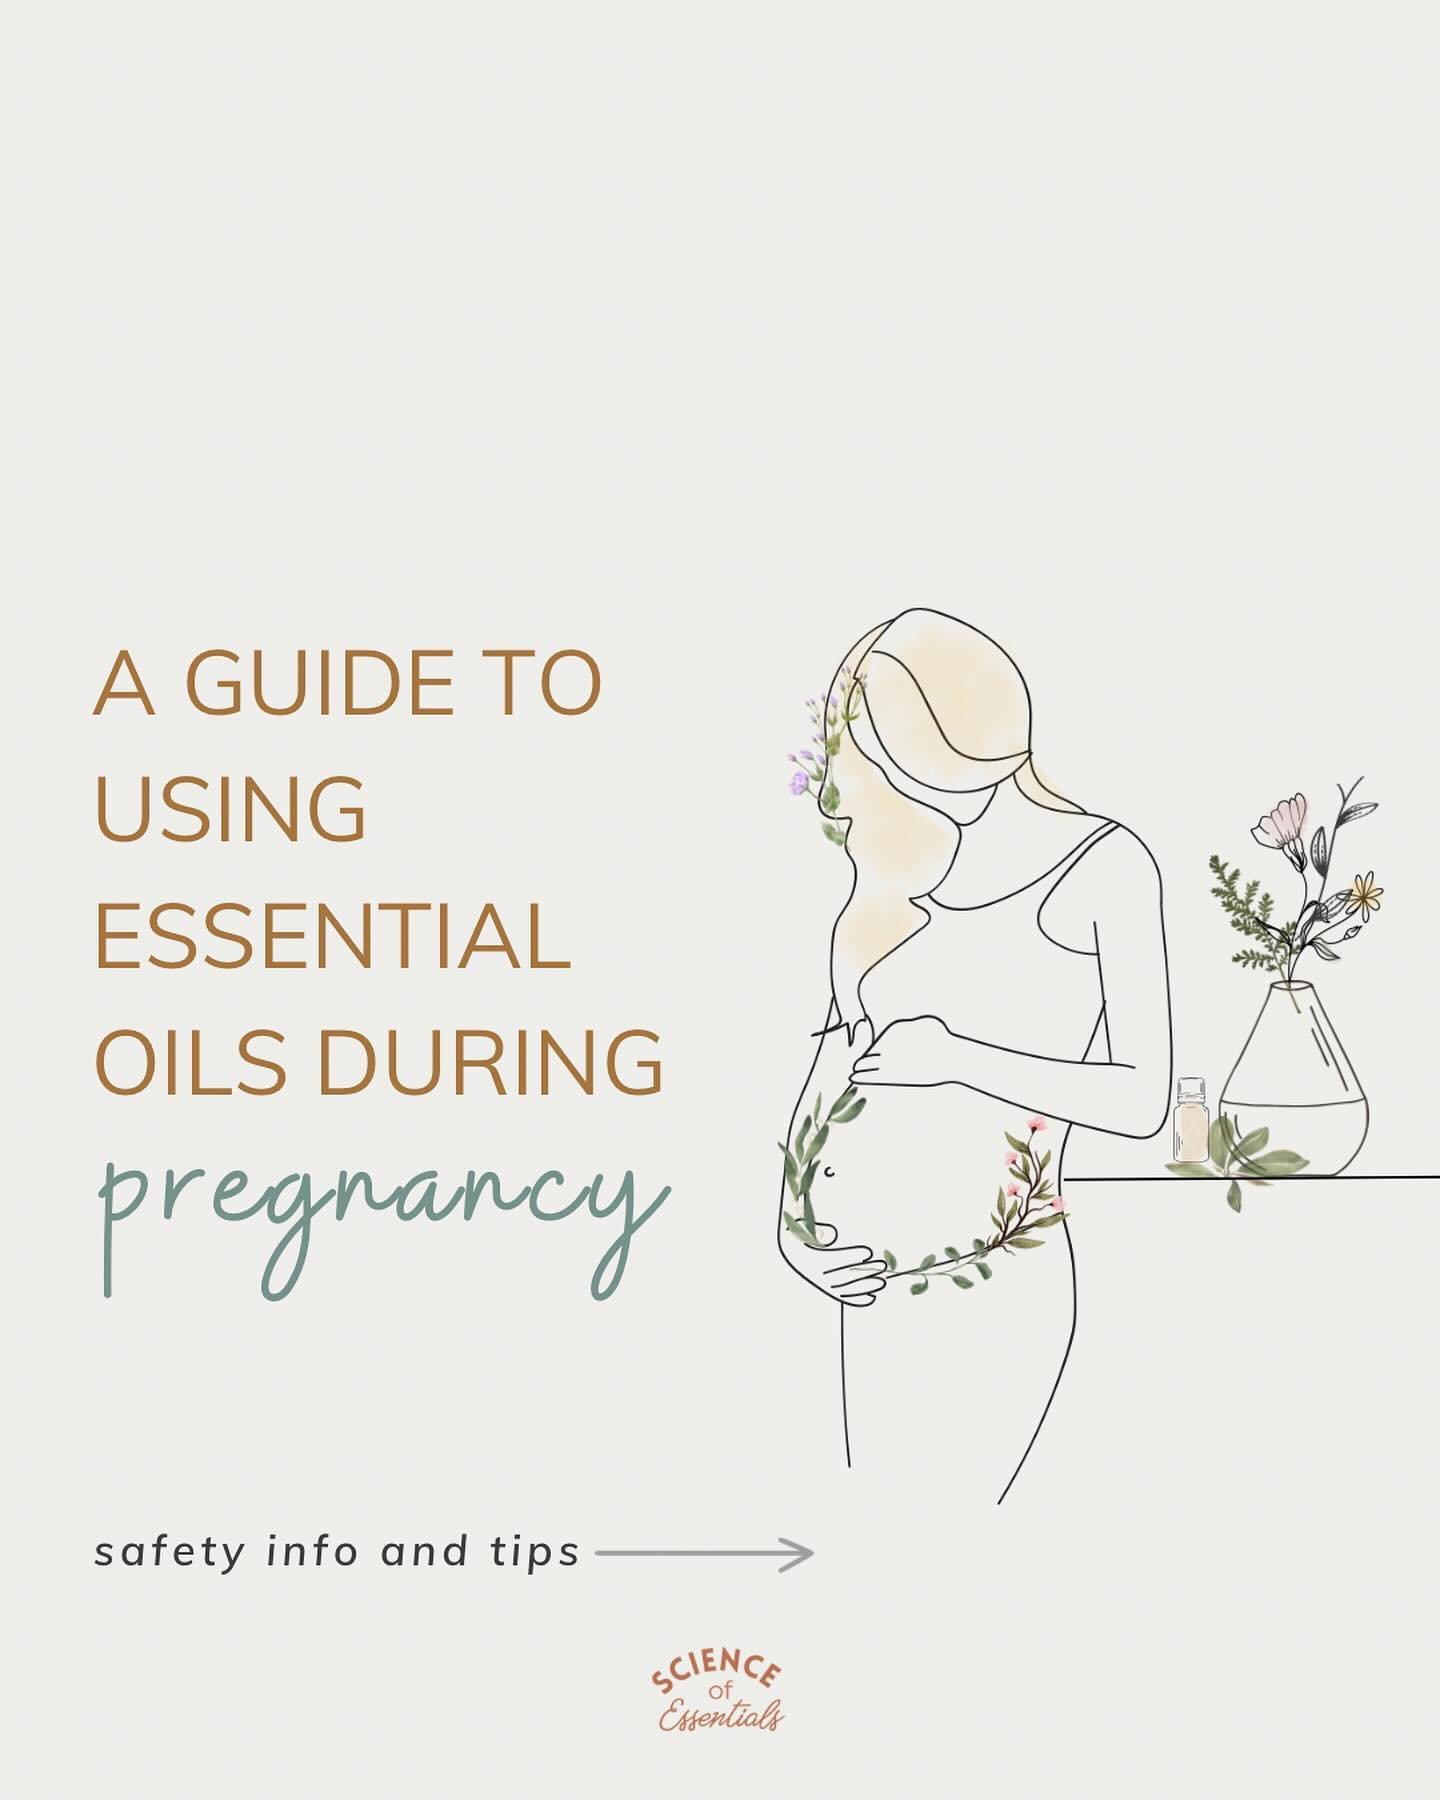 I get asked all the time about using essential oils while pregnant and during labor. I hope this guide serves as a helpful resource for you!

🤰🏽While most essential oils appear to be safe during pregnancy, there are still a few that should be avoid